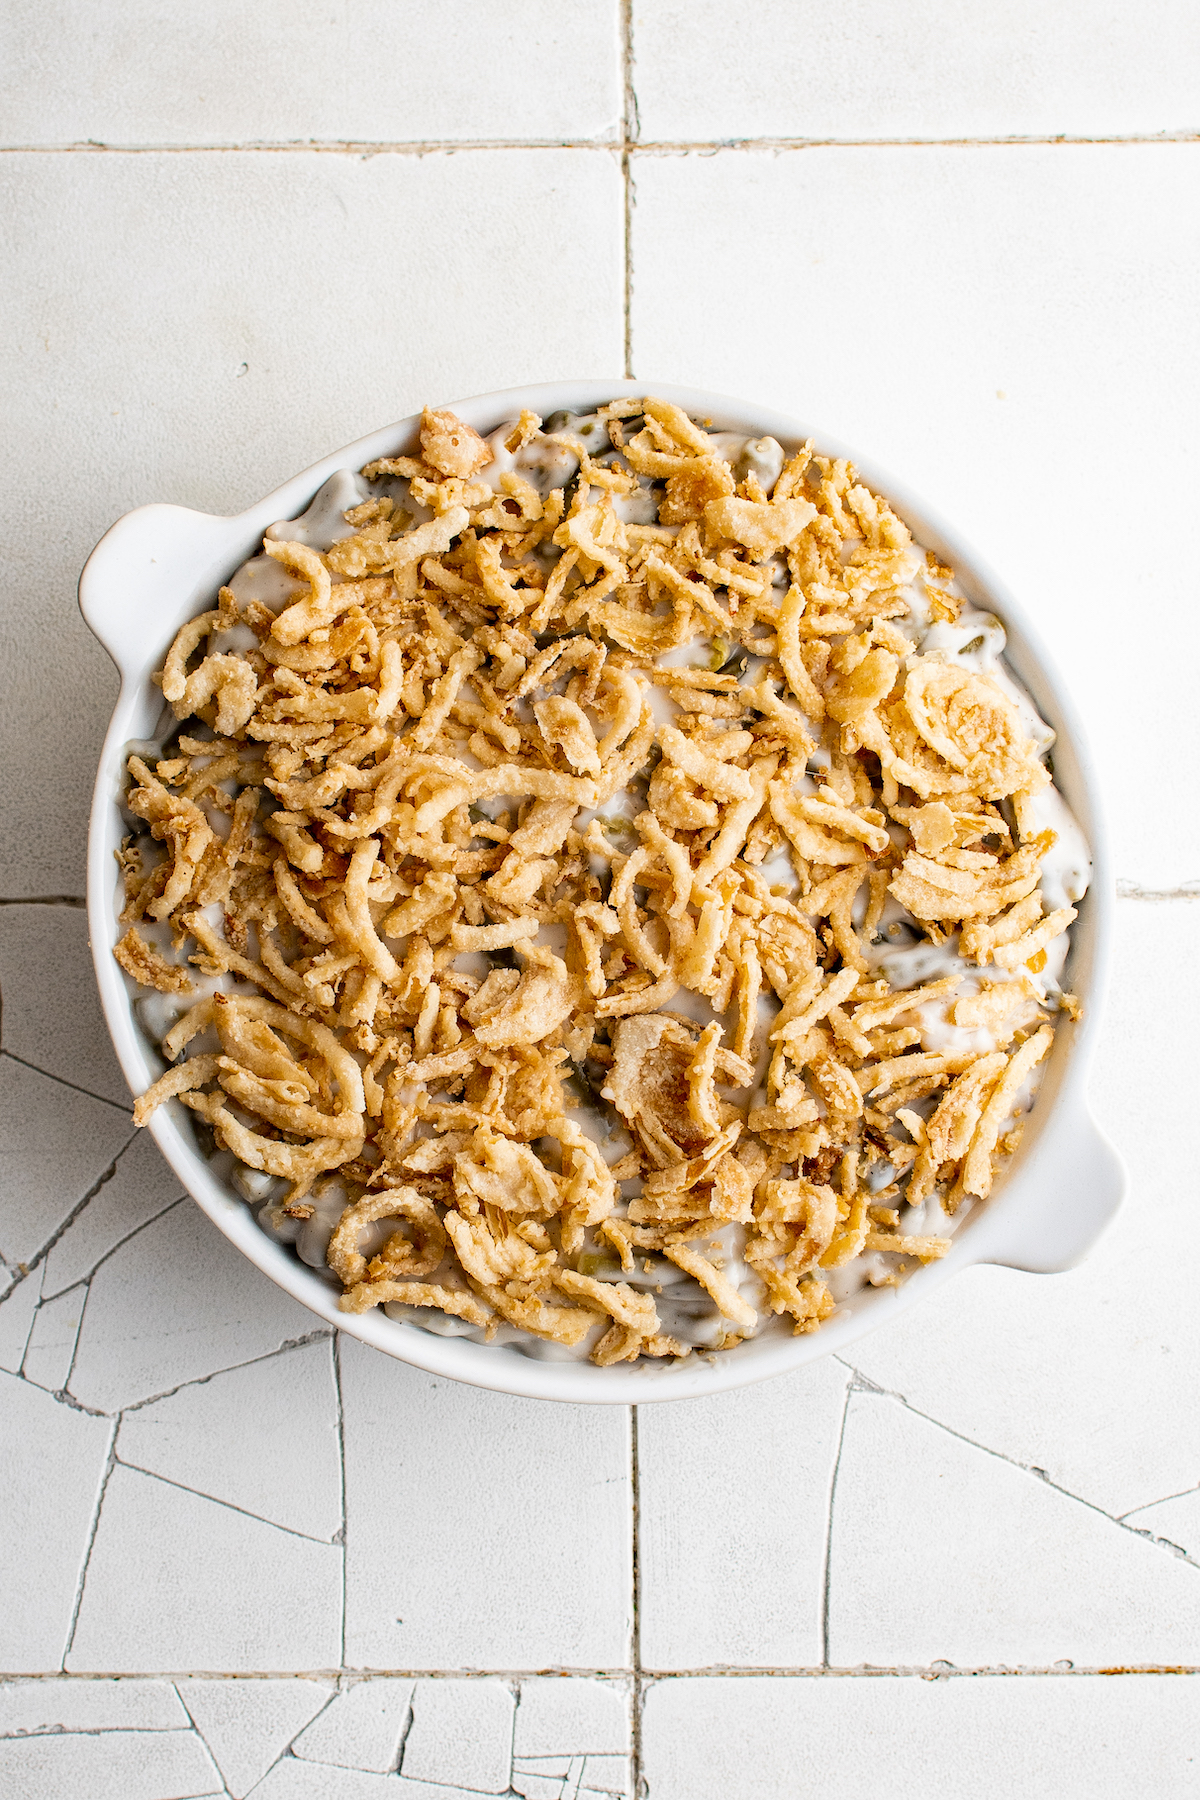 An unbaked casserole topped with fried onions.